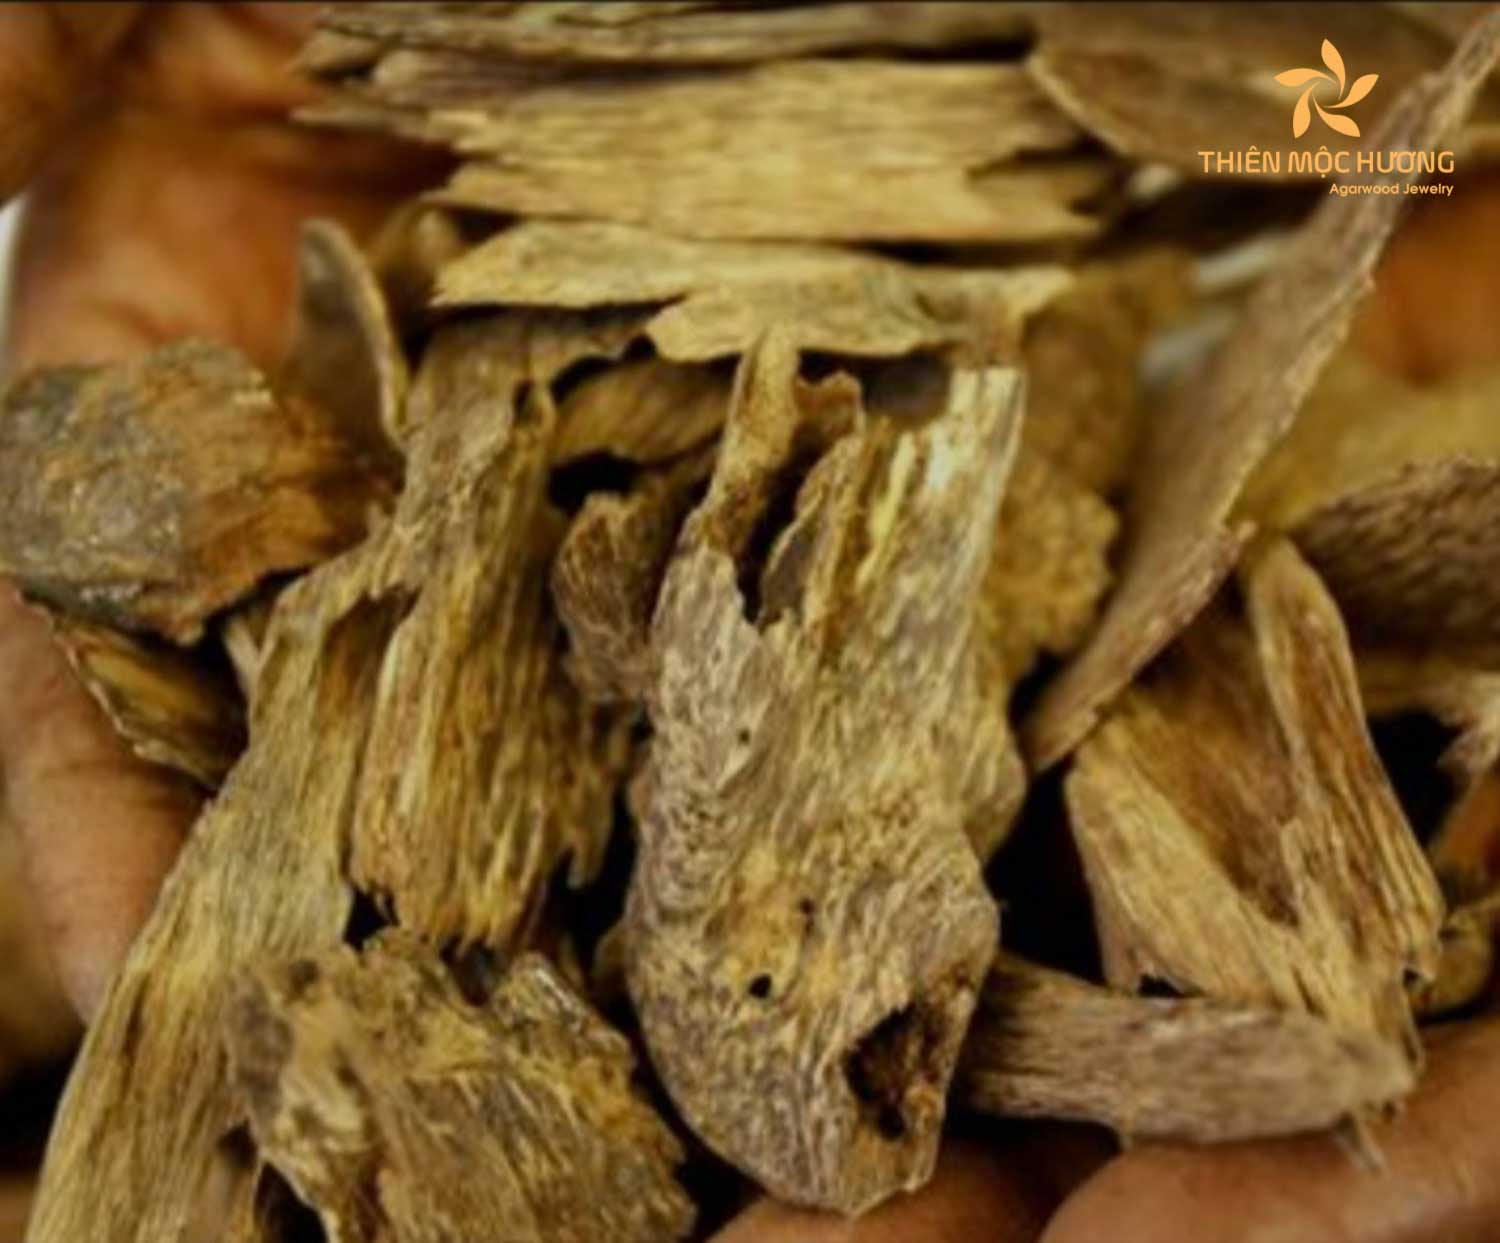 Where to Buy Agarwood in the Philippines - Iba Botanicals